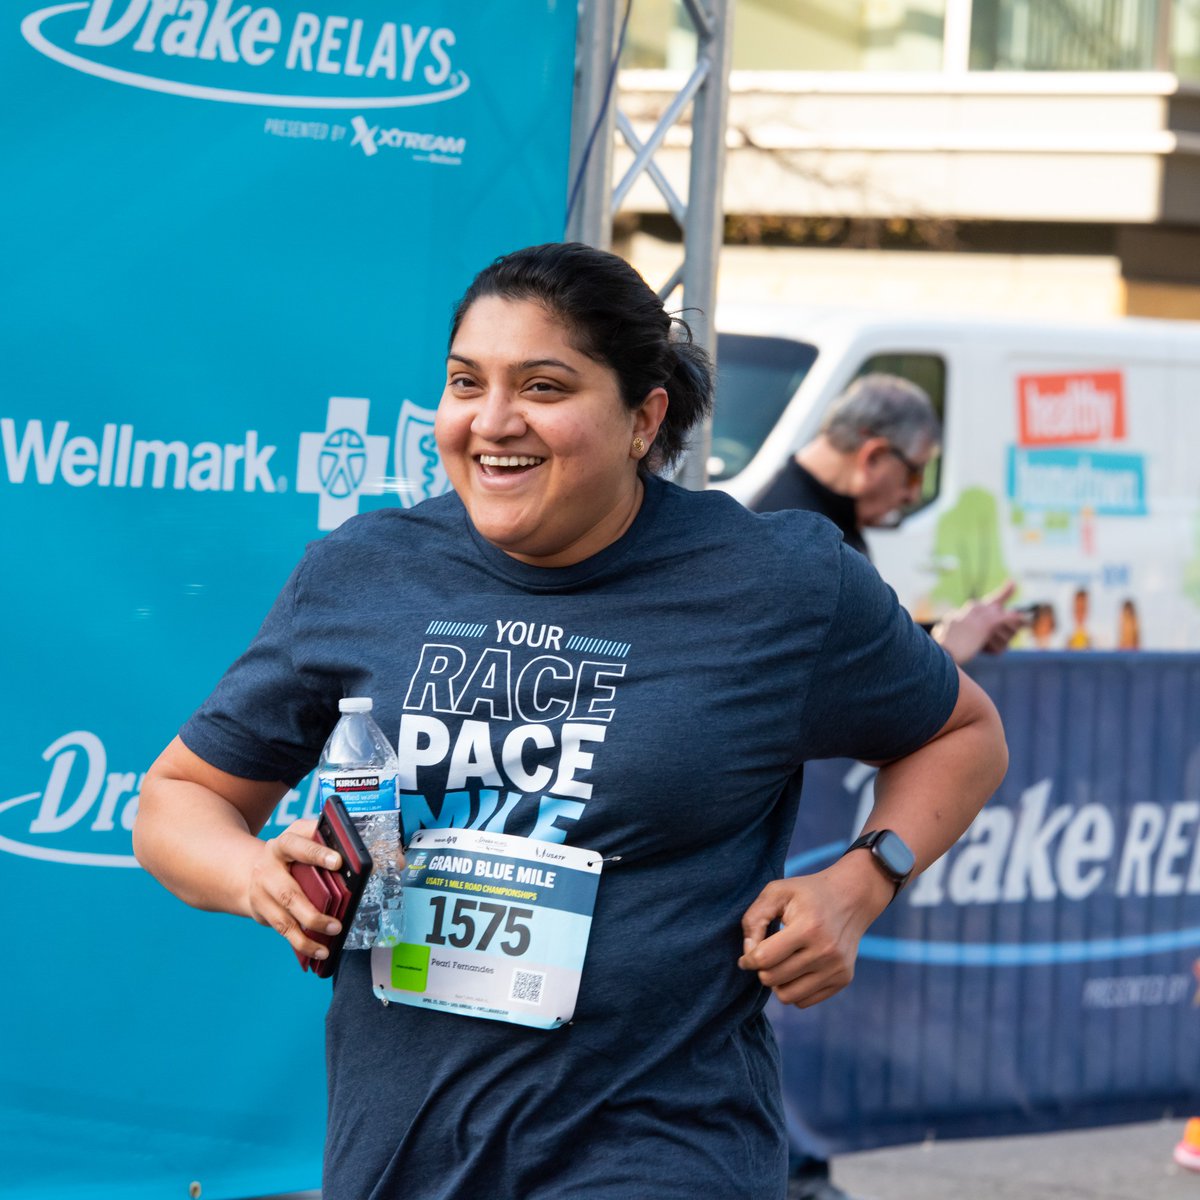 Wellmark looks back on 15 years of community impact through the annual Grand Blue Mile in #DSMUSA and @drakerelays: ow.ly/cFSL50Rk2EX.